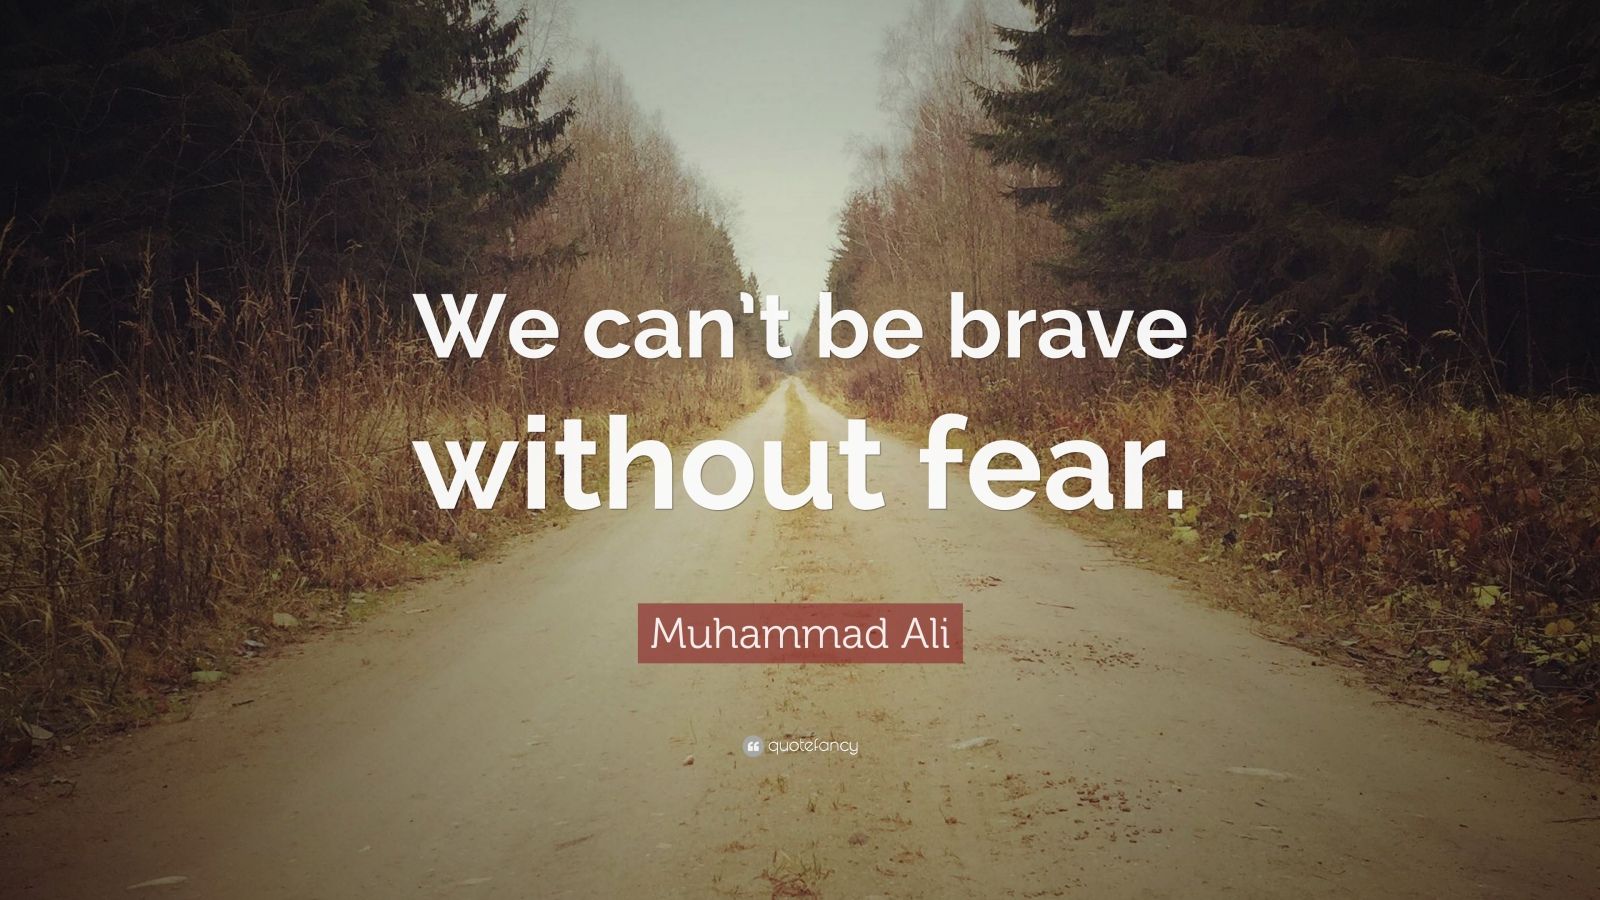 Muhammad Ali Quote: “We can't be brave without fear.” (12 wallpapers) -  Quotefancy